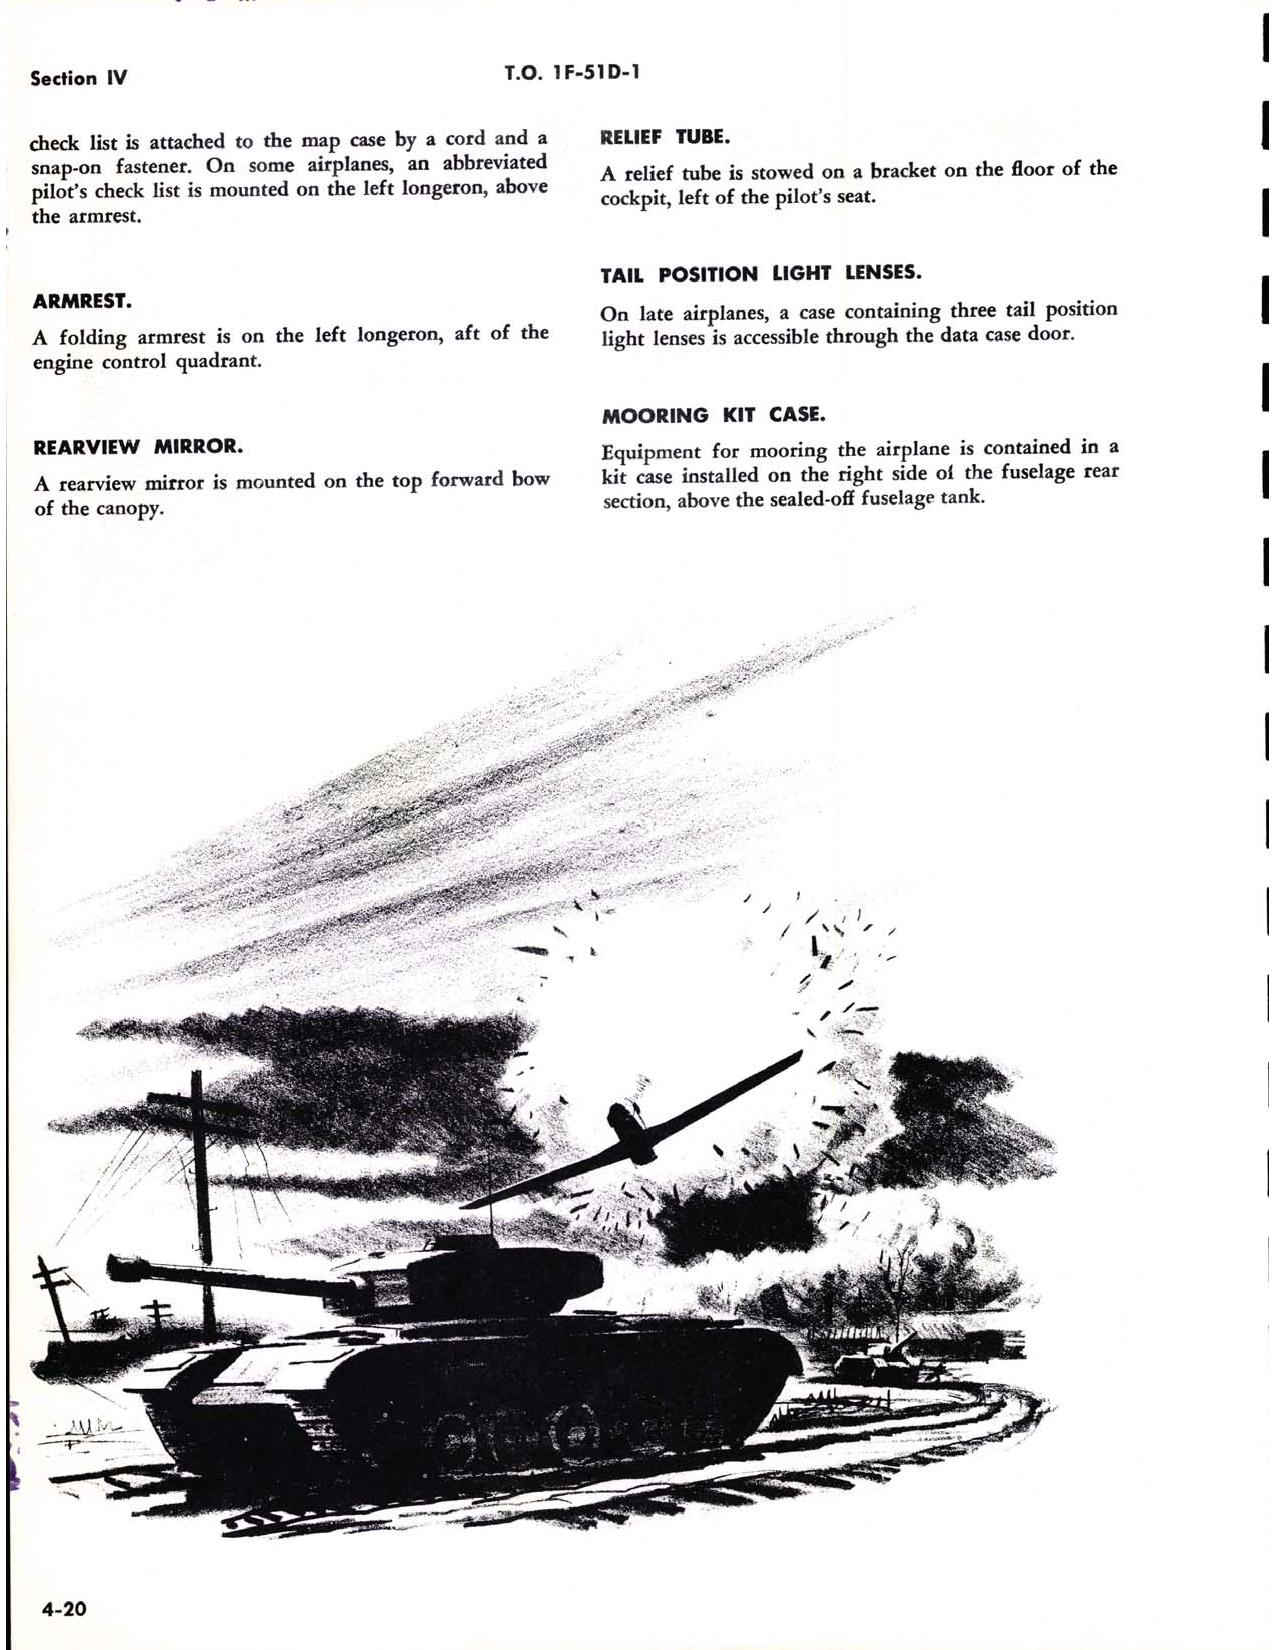 Sample page 80 from AirCorps Library document: Flight Handbook F-51D